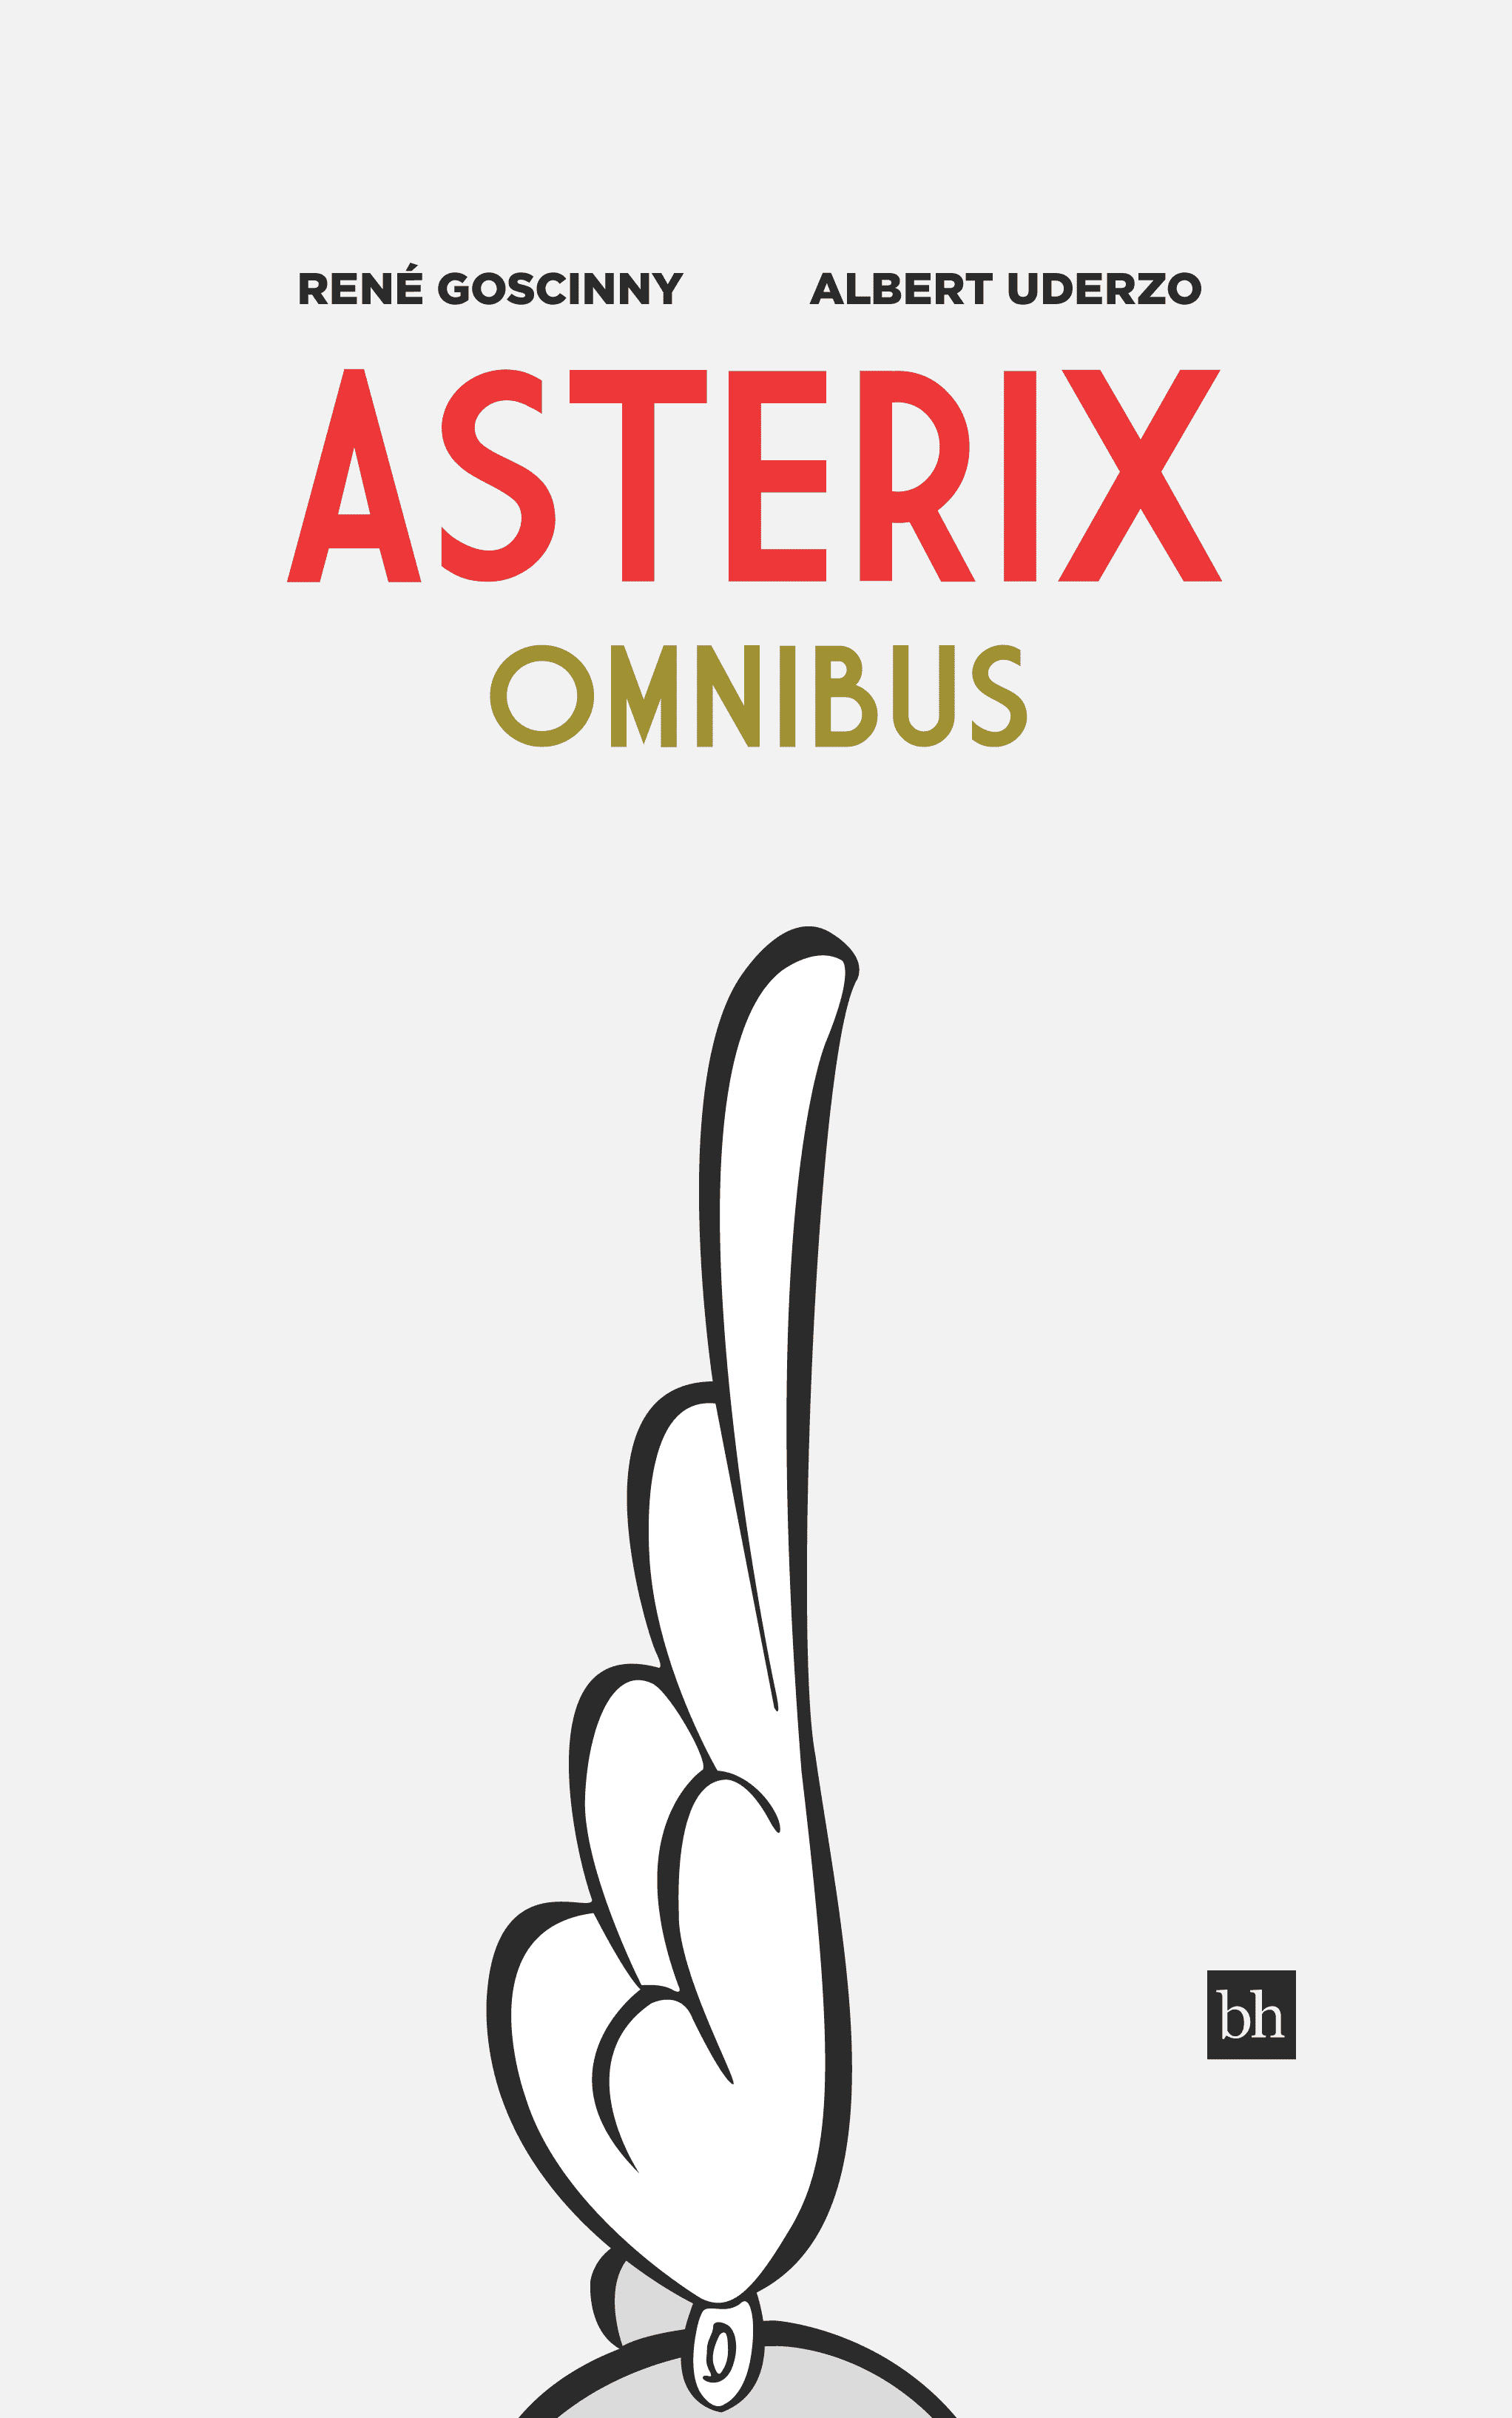 Book cover mock thumbnail for Asterix Omnibus